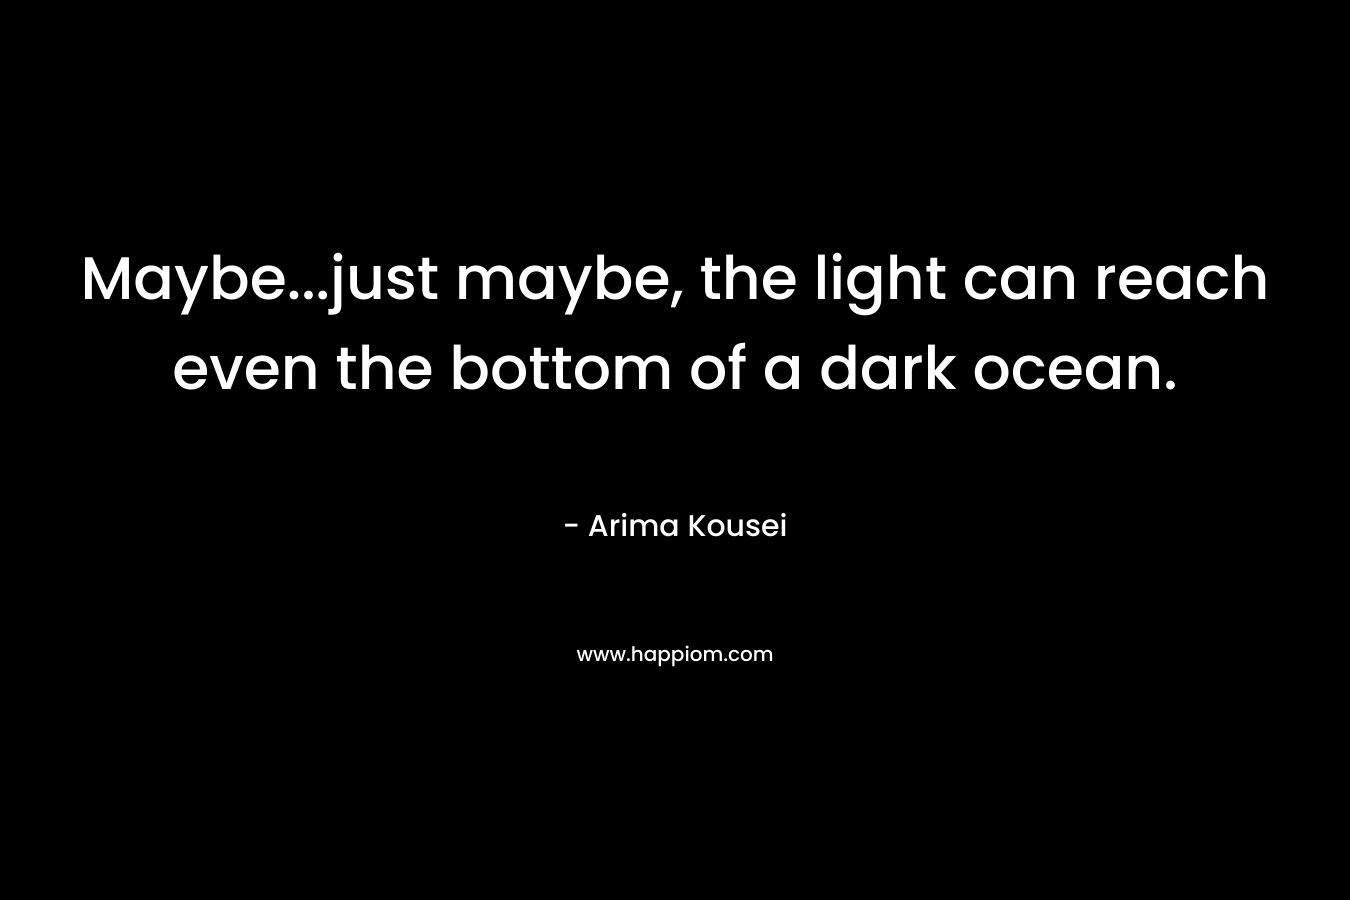 Maybe...just maybe, the light can reach even the bottom of a dark ocean.